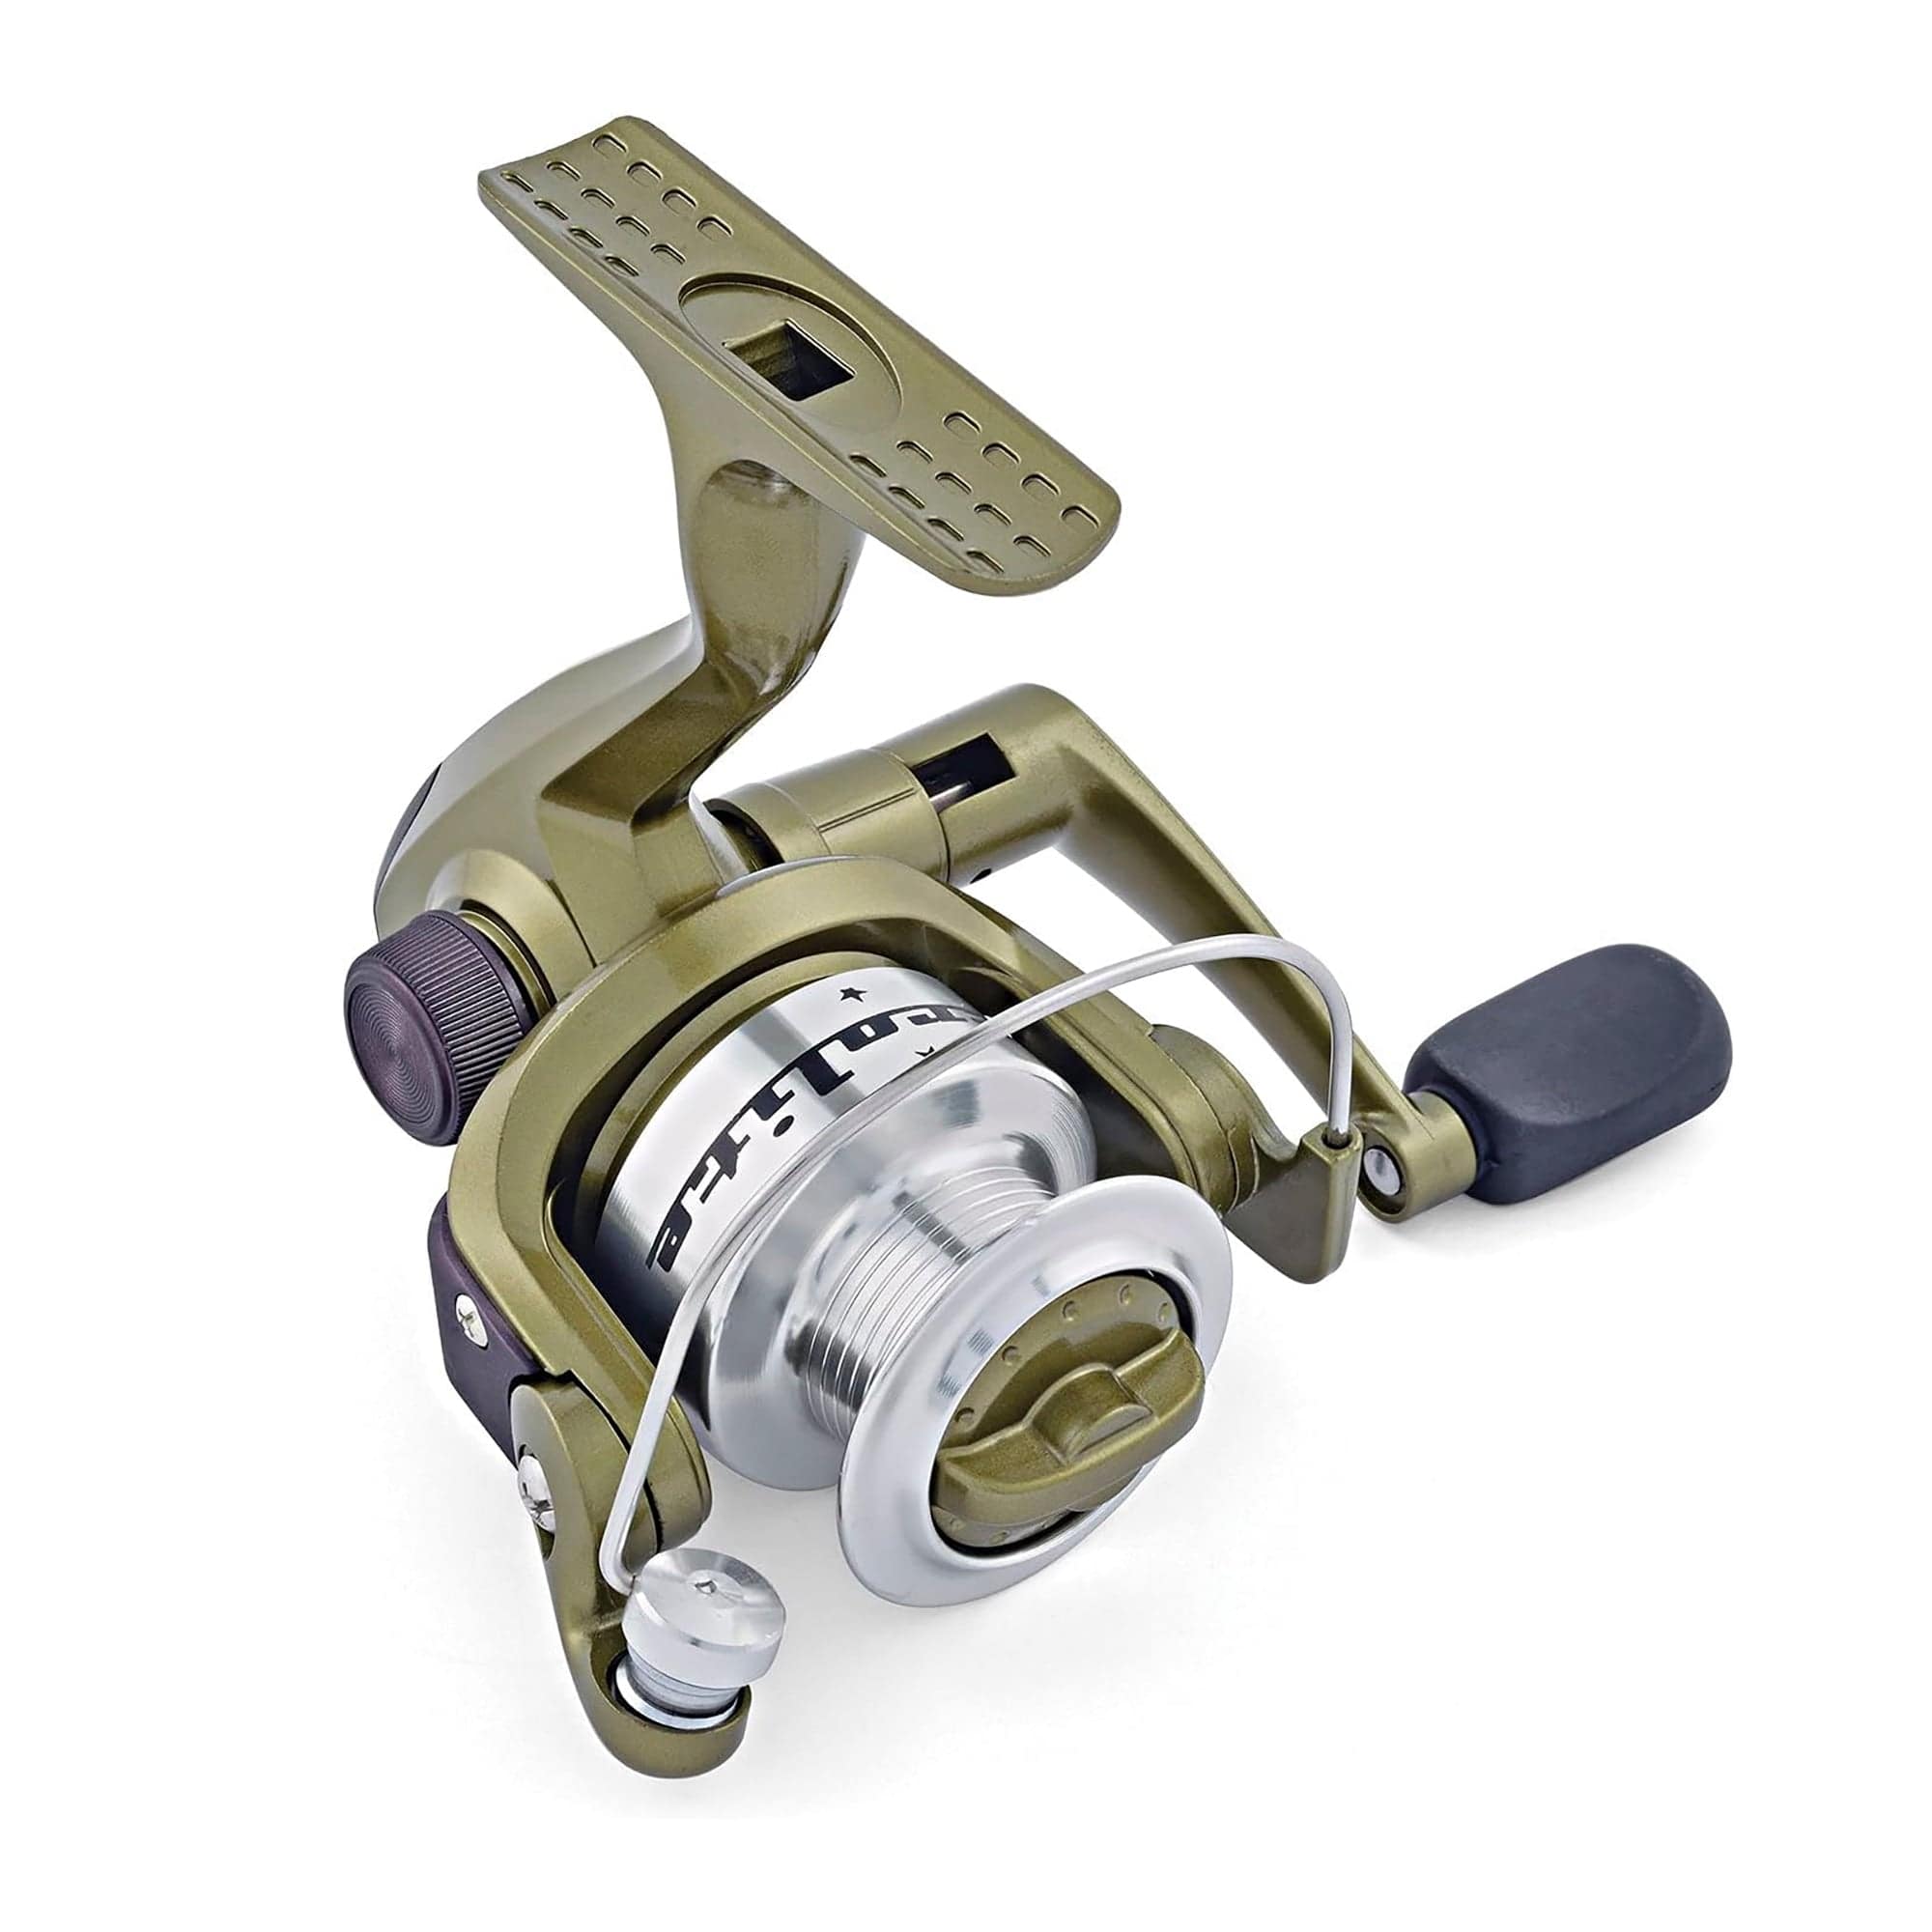 Microlight 2BB Spincast Reel Clam SouthBend MLSP-210/CP